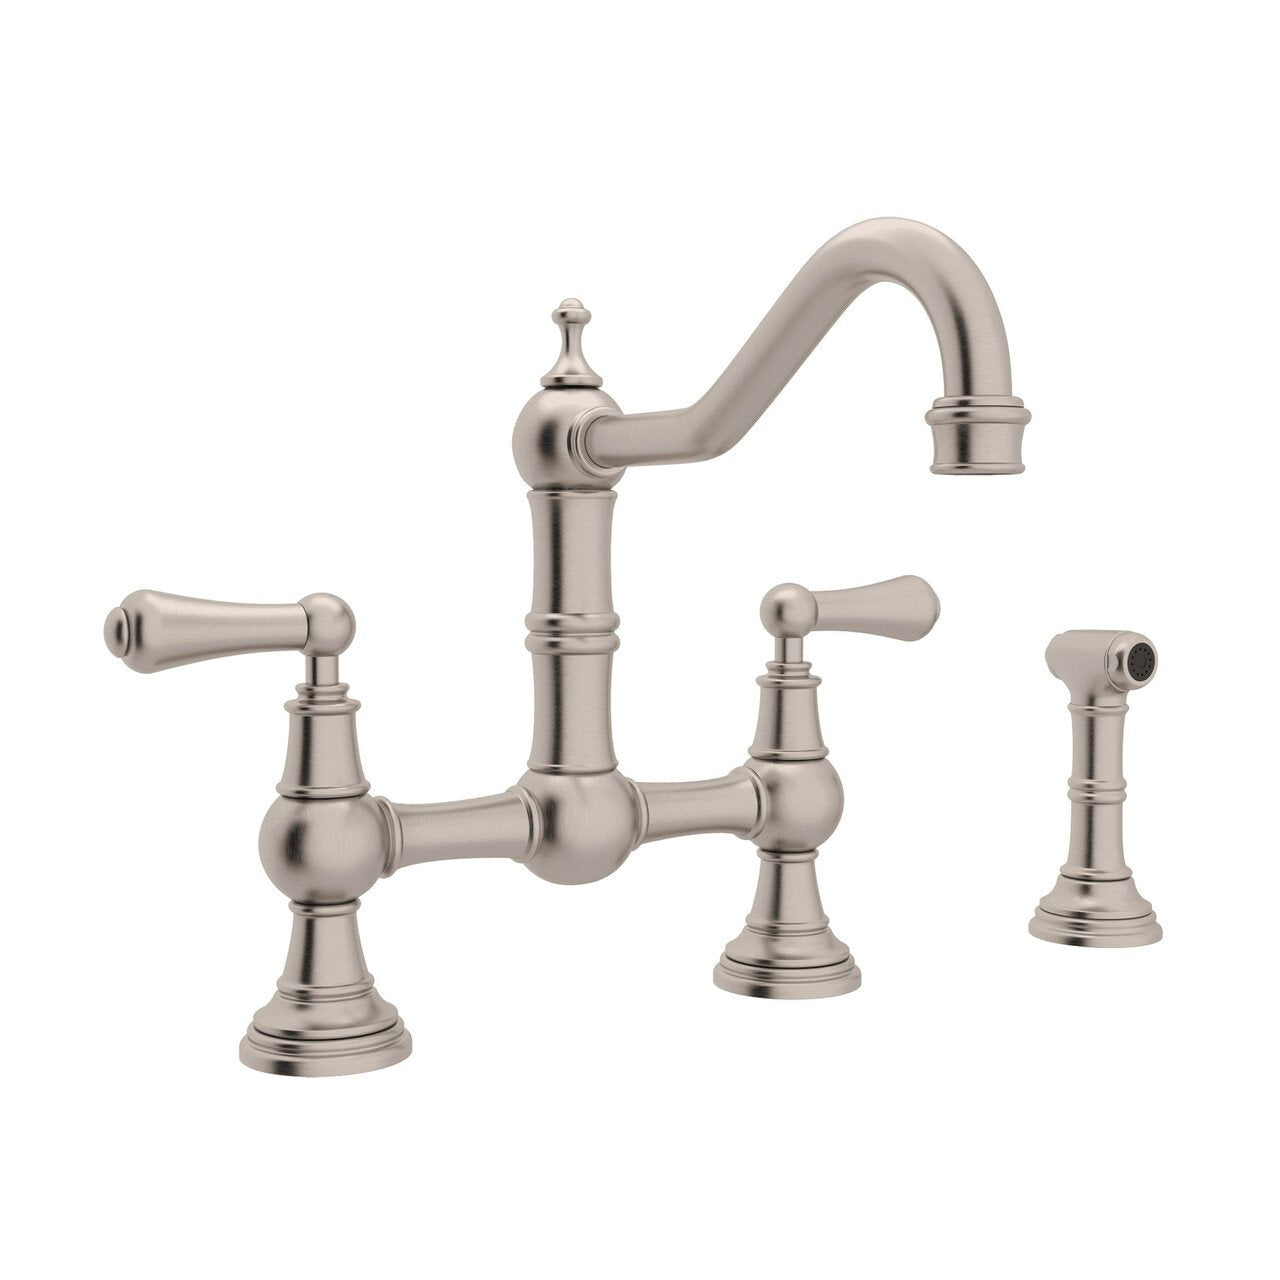 Perrin & Rowe Edwardian Bridge Kitchen Faucet with Sidespray - BNGBath